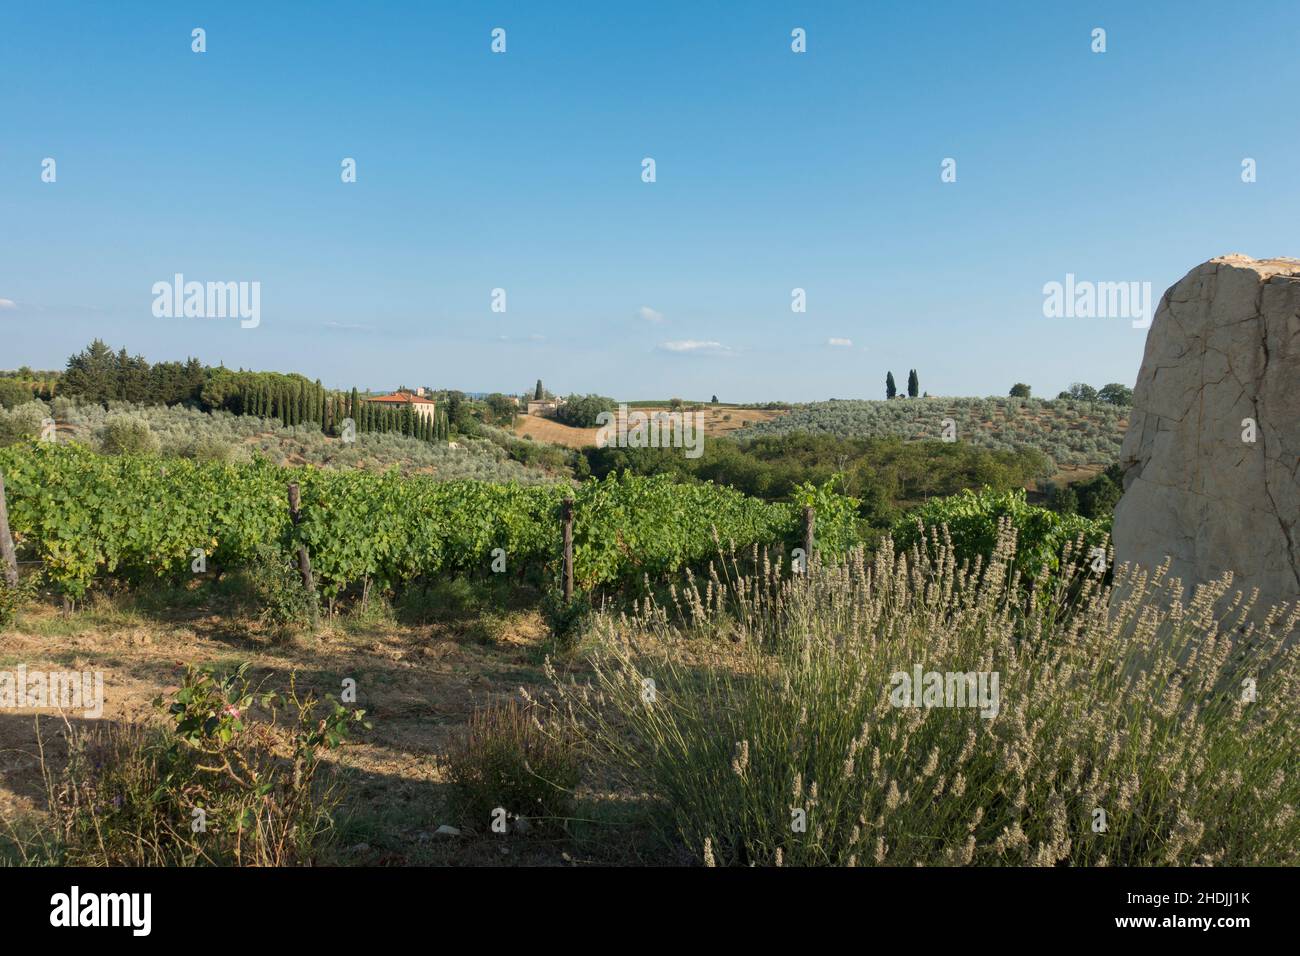 tuscany, viticulture, tuscanies, viticultures Stock Photo